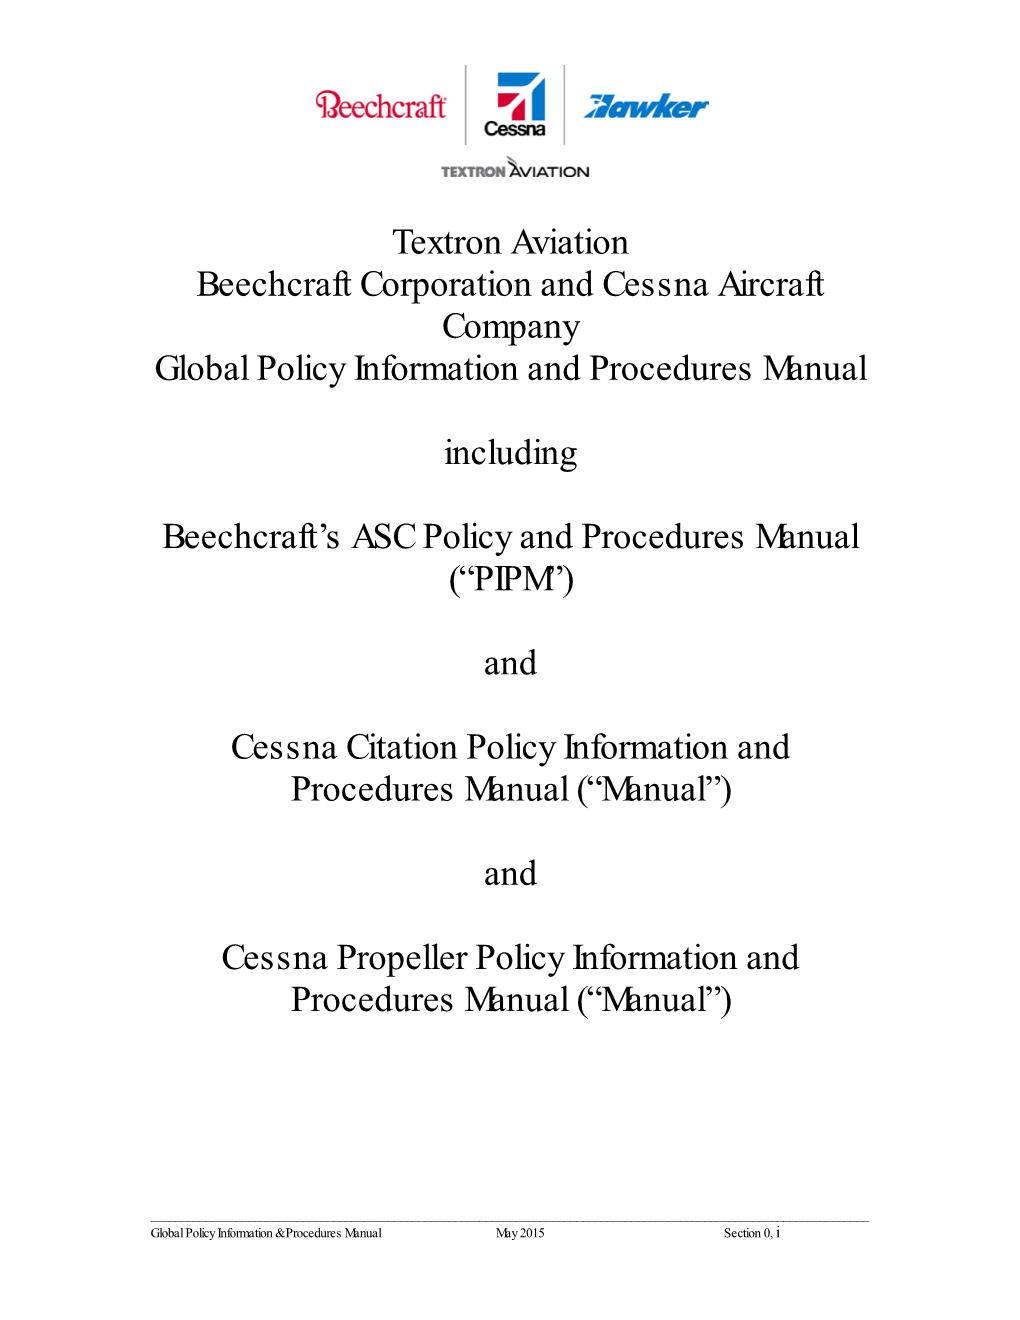 Textron Aviation Beechcraft Corporation and Cessna Aircraft Company Global Policy Information and Procedures Manual